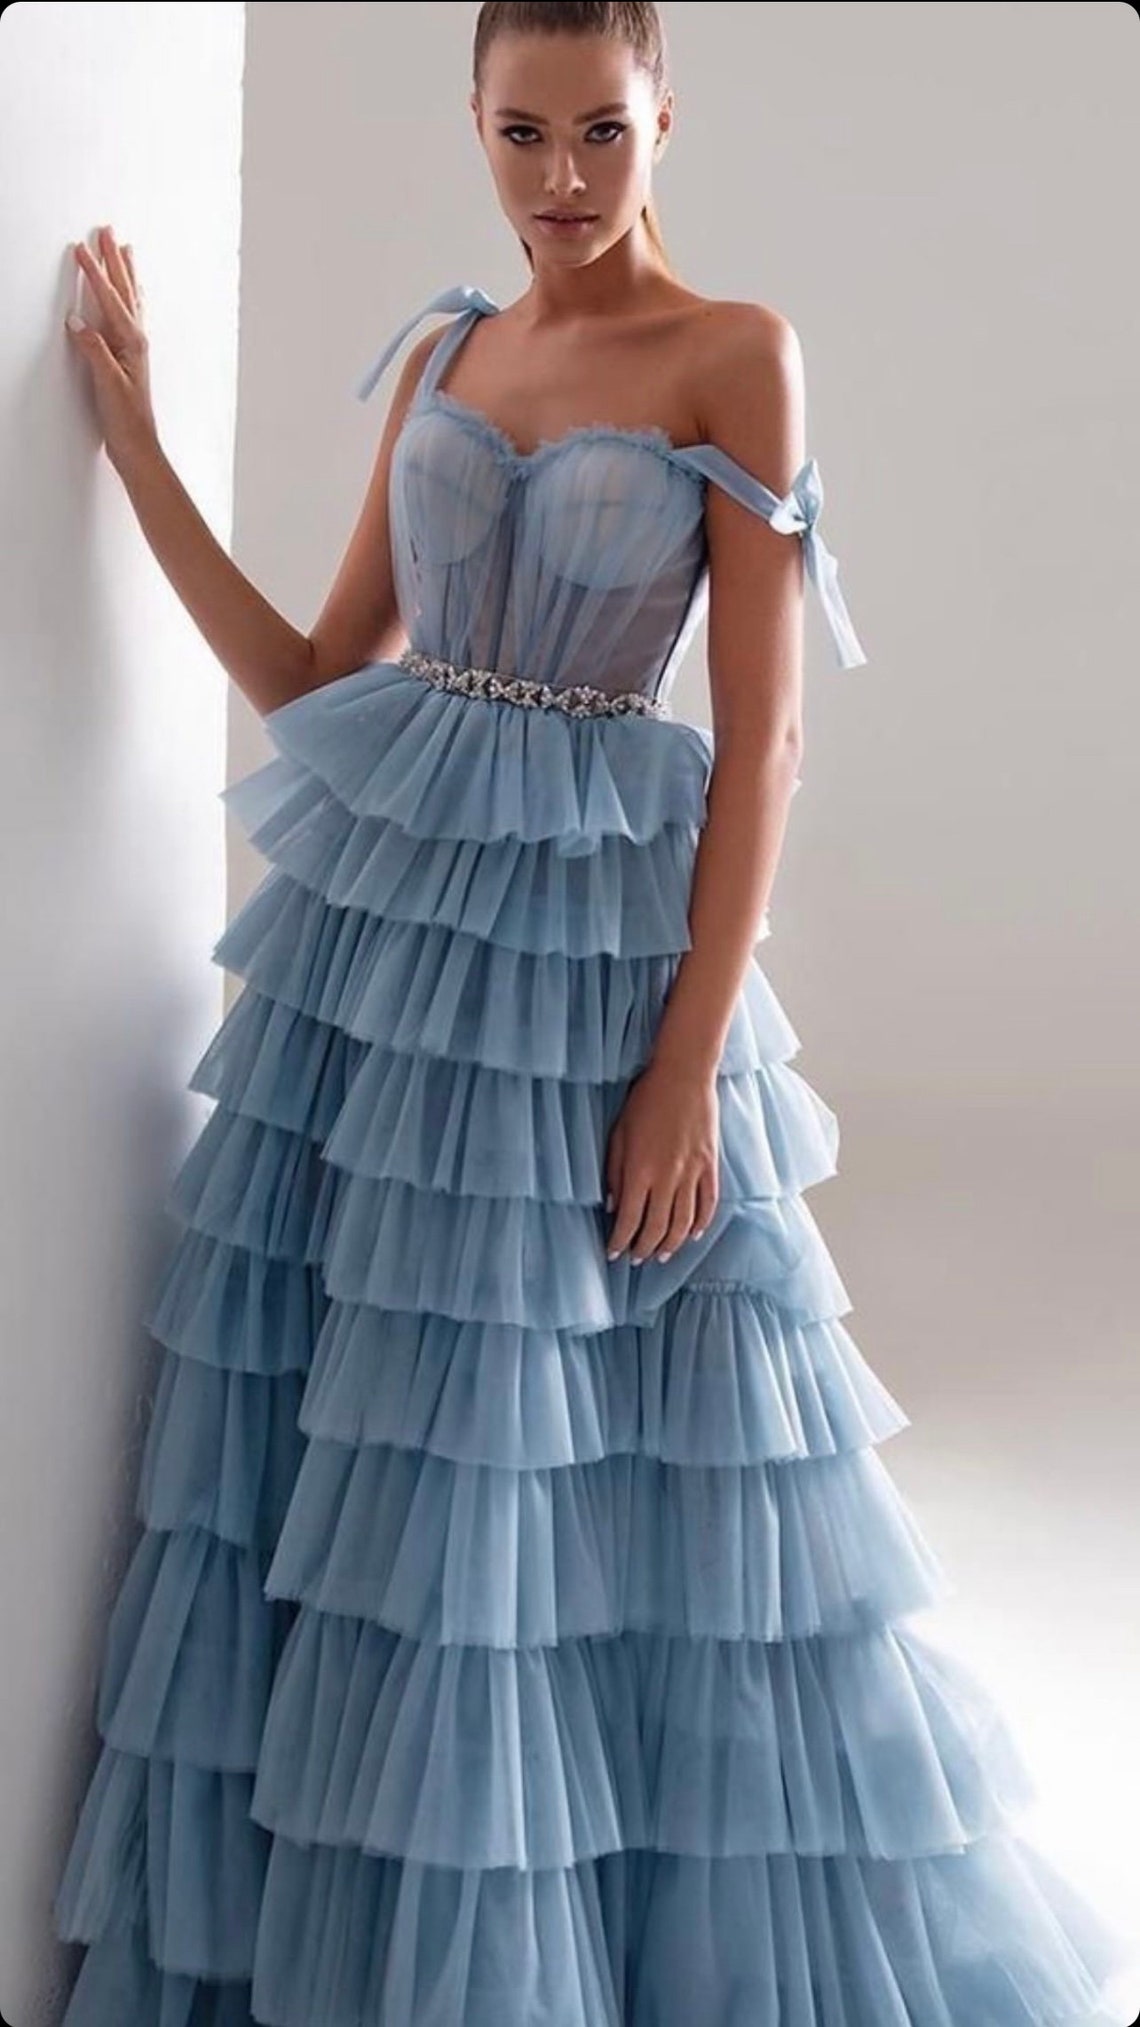 Prom Dress Wedding Dress Bridal Gown Tulle Gown Layered - Etsy